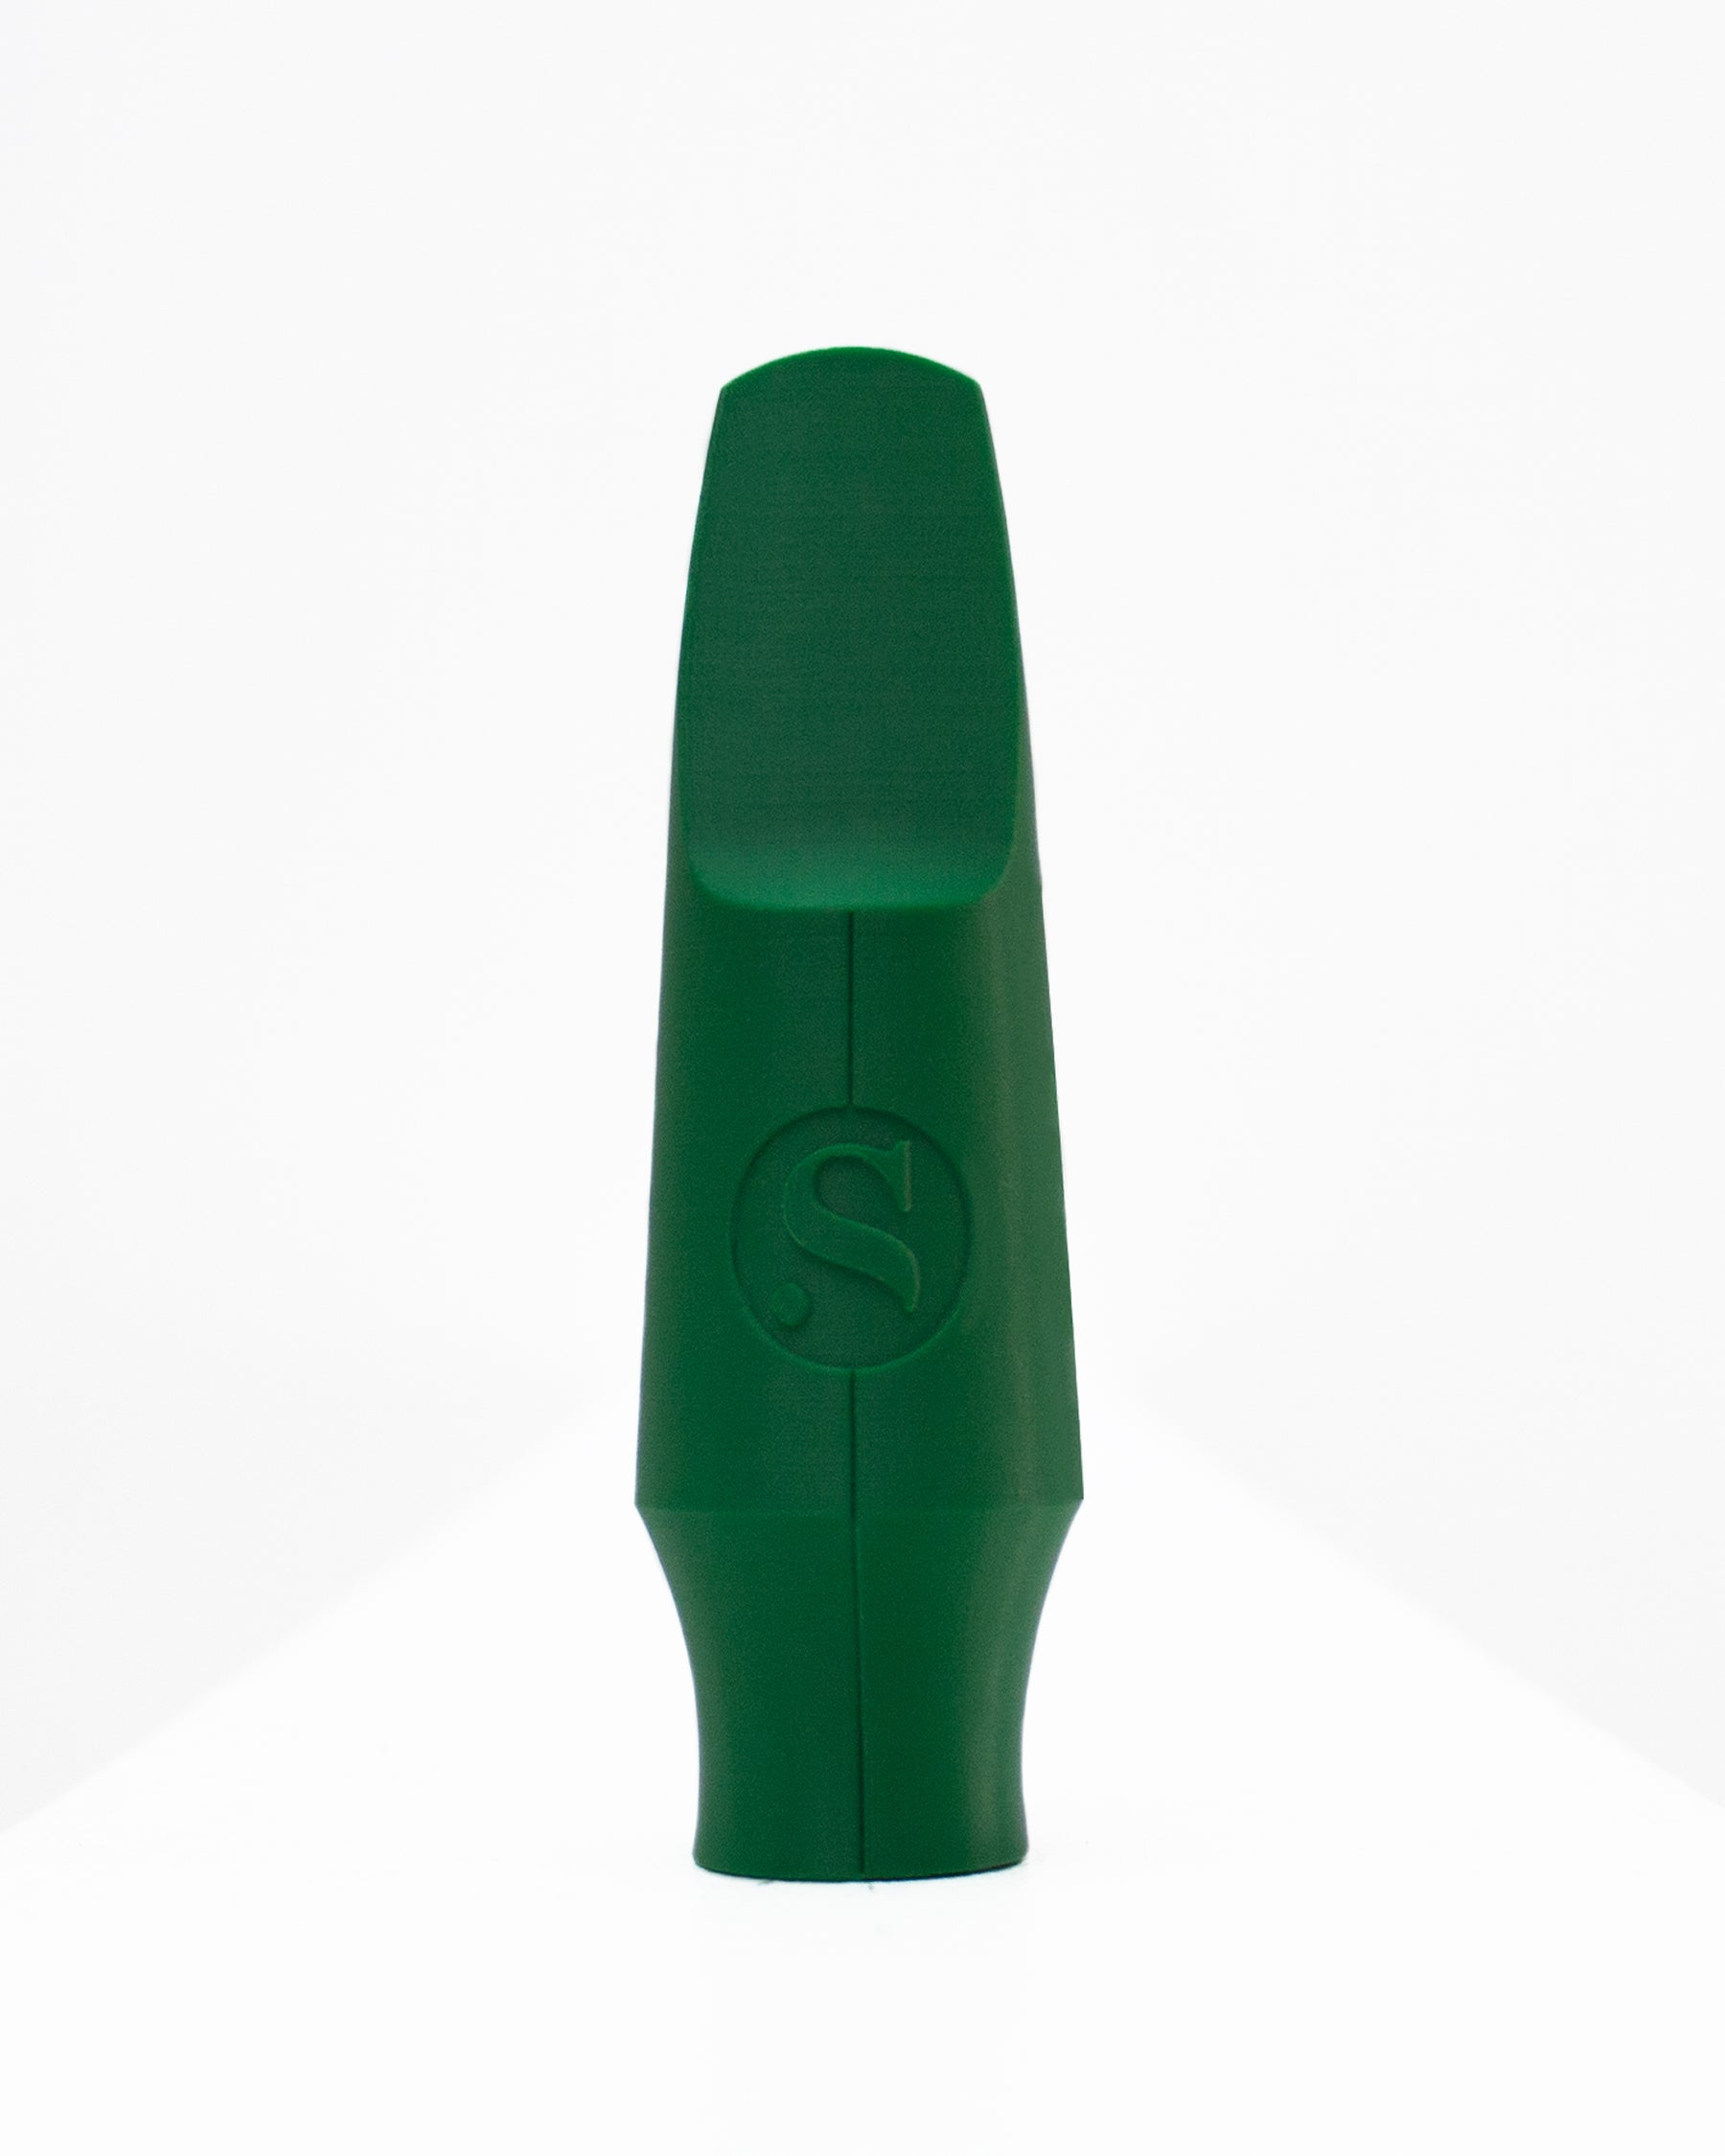 Tenor Originals Saxophone mouthpiece - Spark by Syos - 8 / Forest Green